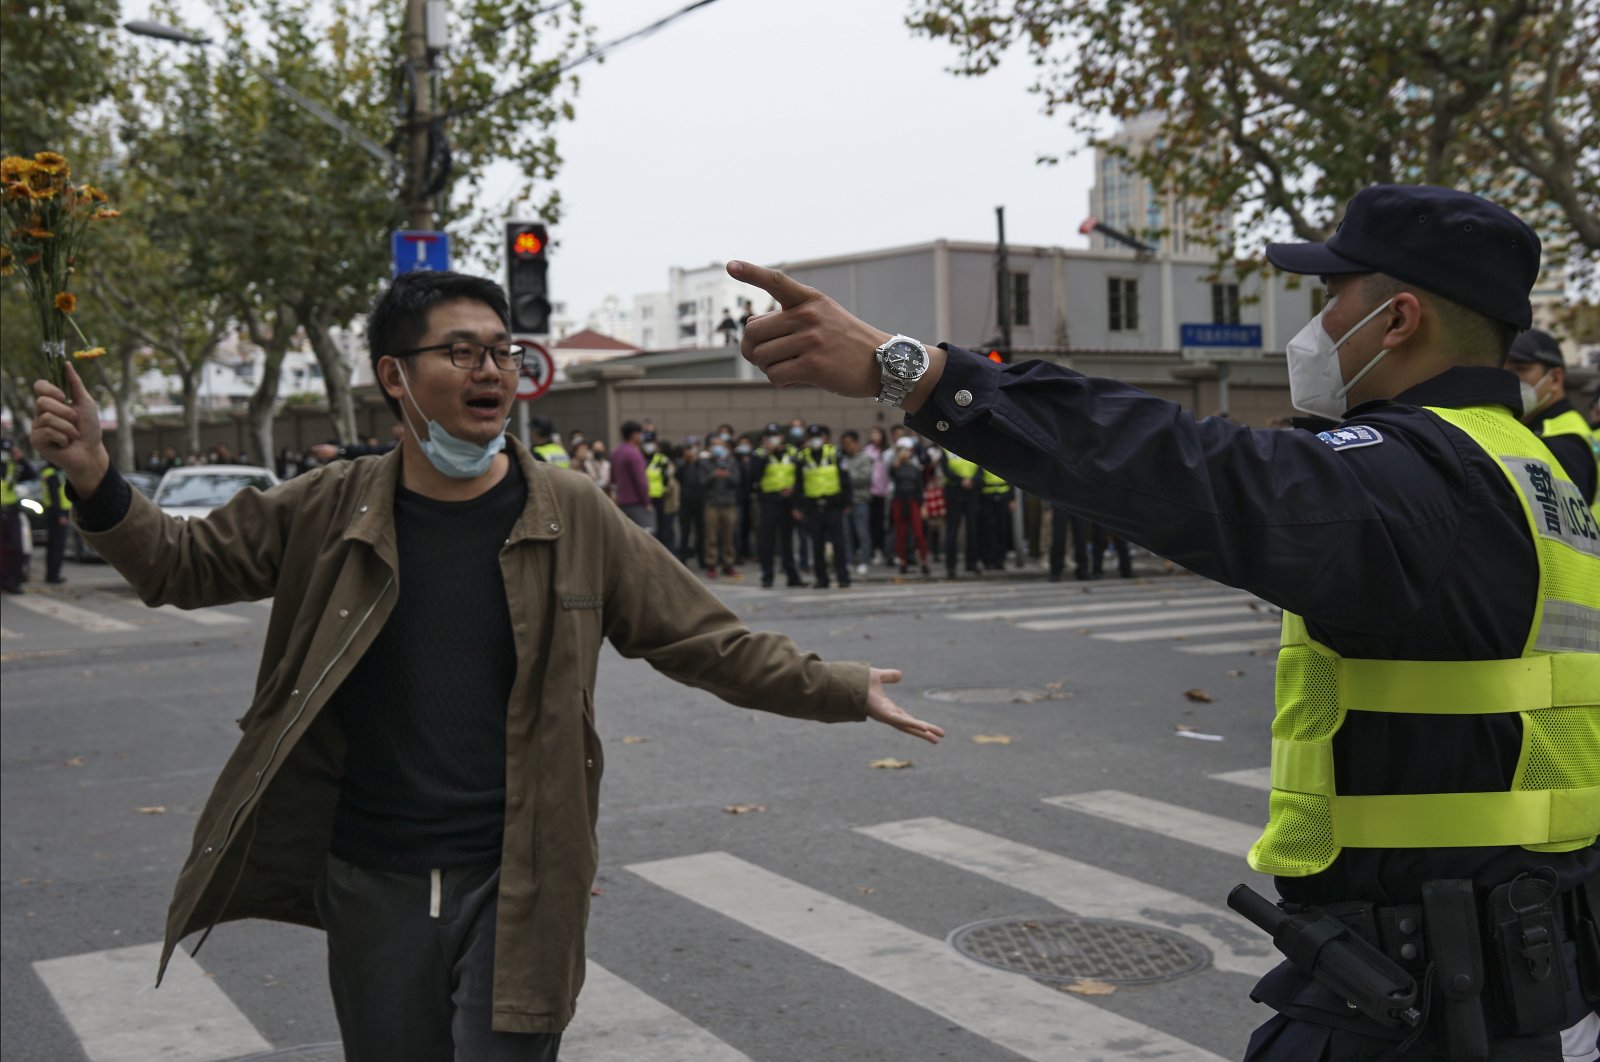 A protester holding flowers is confronted by a policeman during a protest on a street in Shanghai, China, Nov. 27, 2022. (AP Photo)